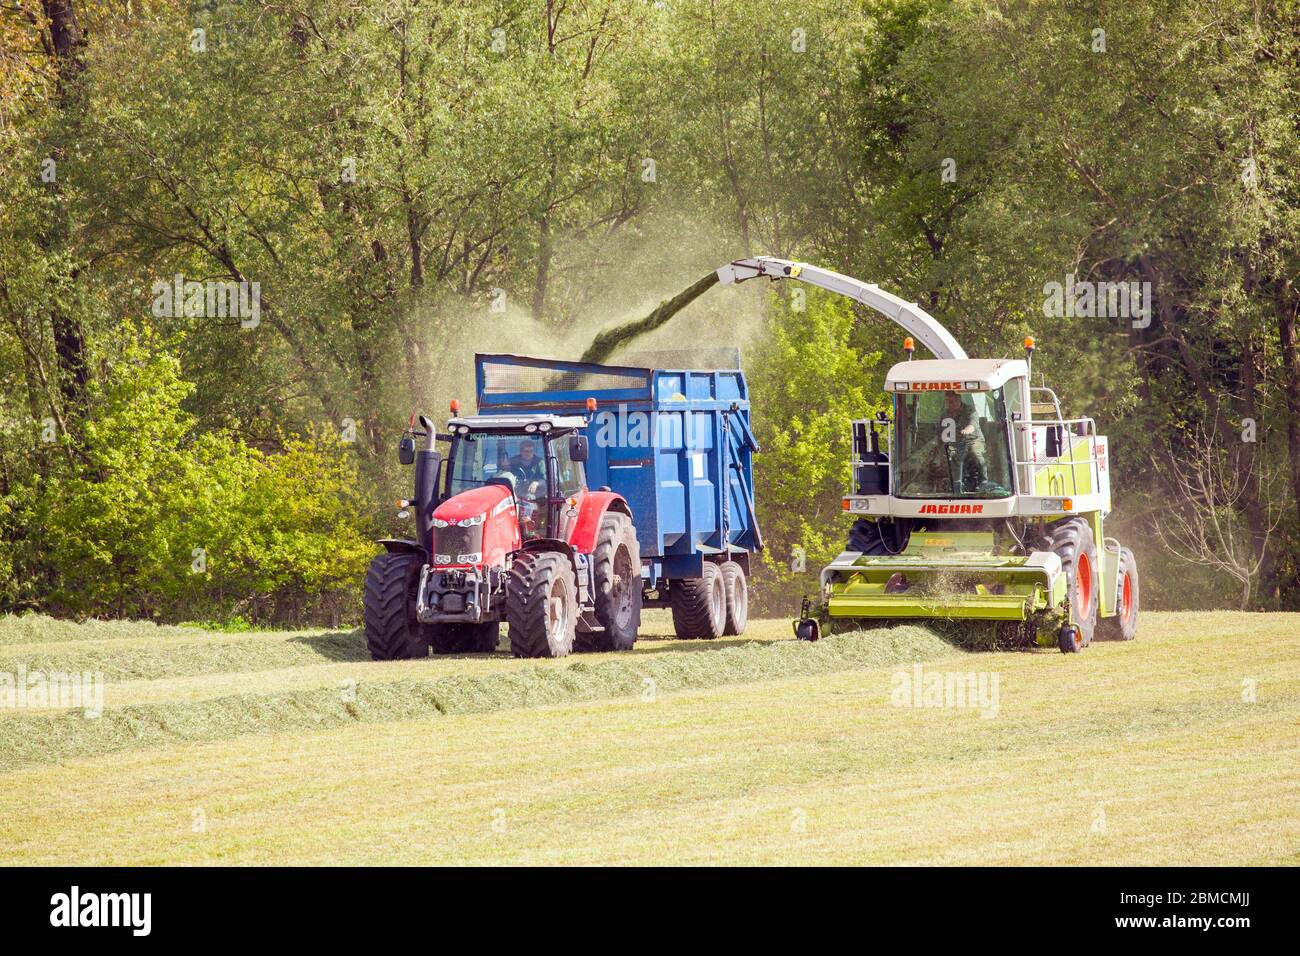 Farmer collecting grass for silage in the Cheshire countryside farmland driving a red Massey Ferguson 7624 tractor and a Claas Jaguar 840 harvester Stock Photo